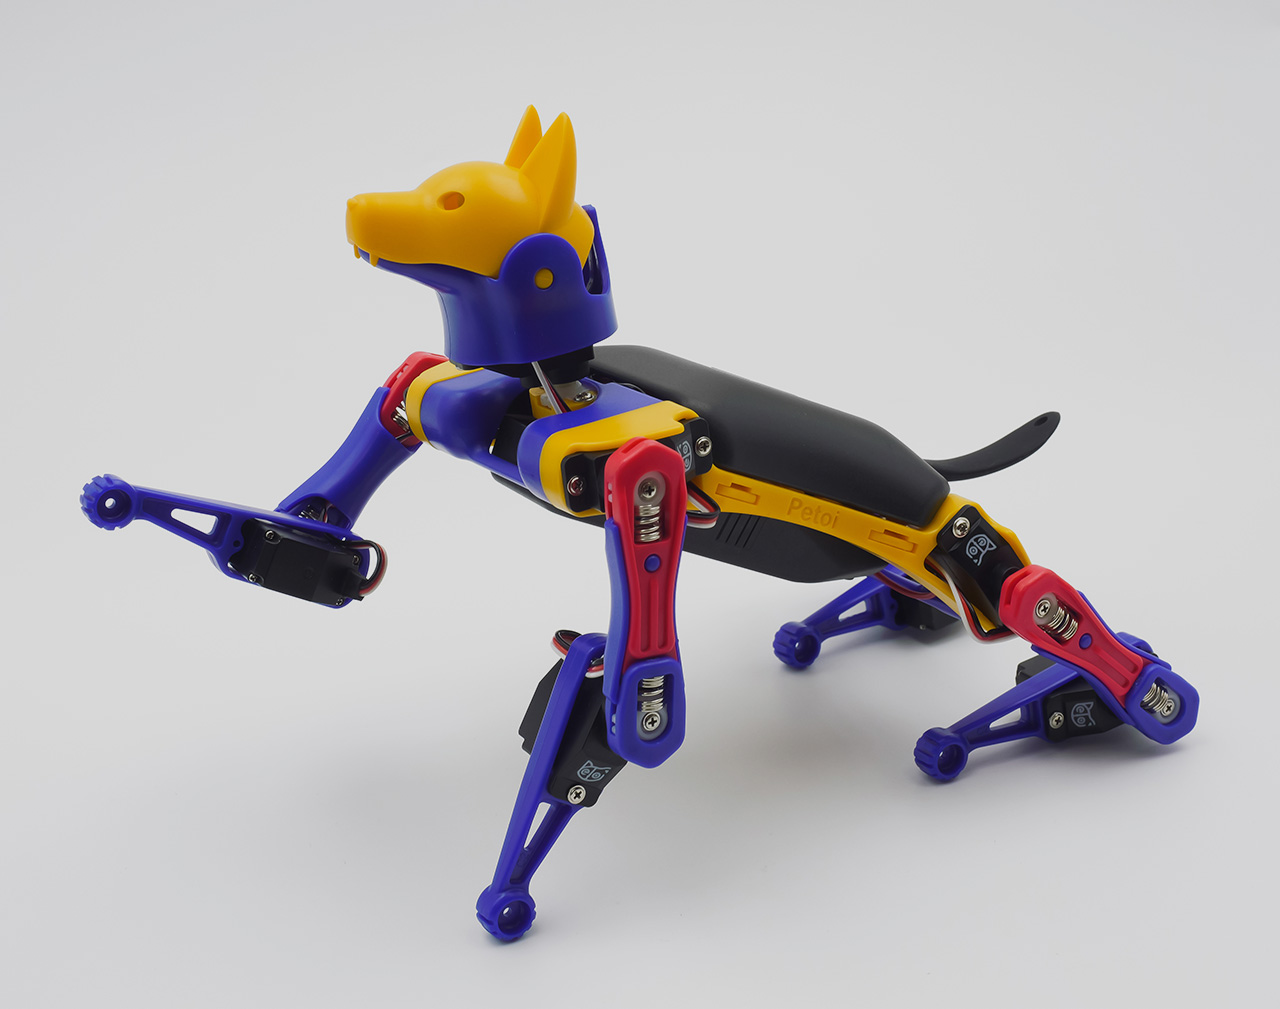 Spot-Inspired Robot Dog Is Almost as Smart but Made of LEGO, It Can Walk  and Dance - autoevolution